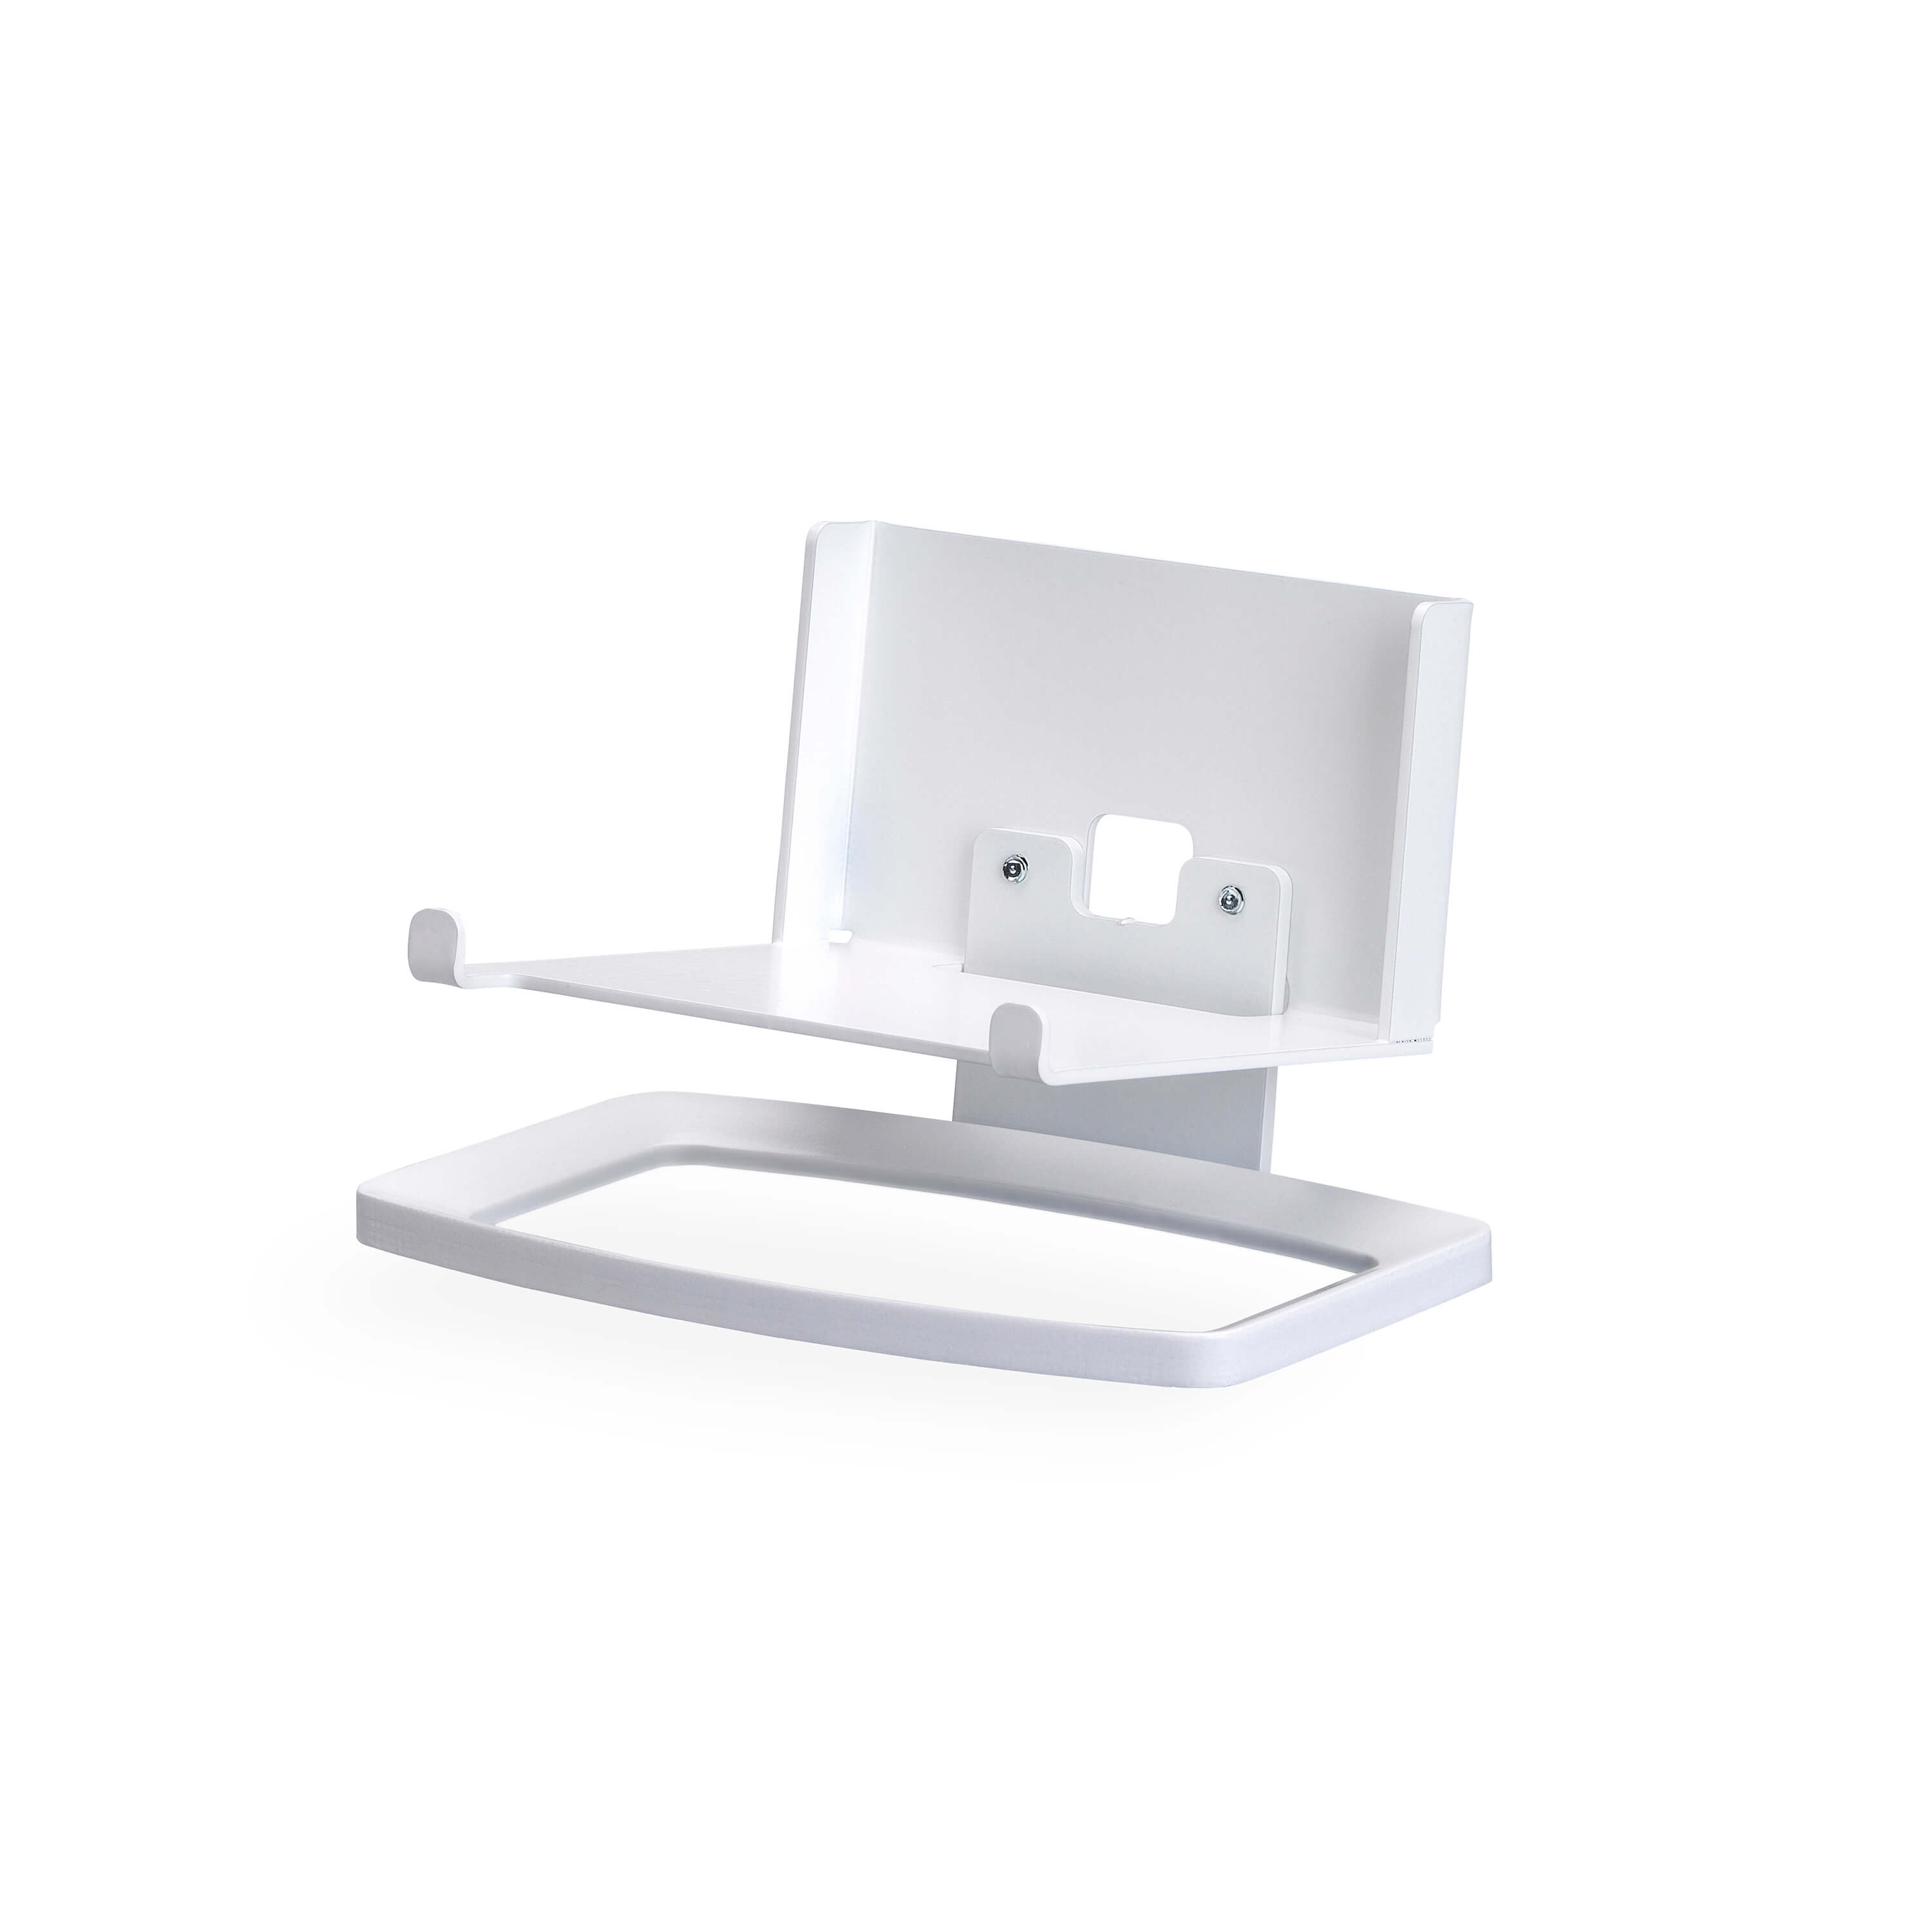 SoundXtra BOSE SOUNDTOUCH 10 Desk Stand white Singel